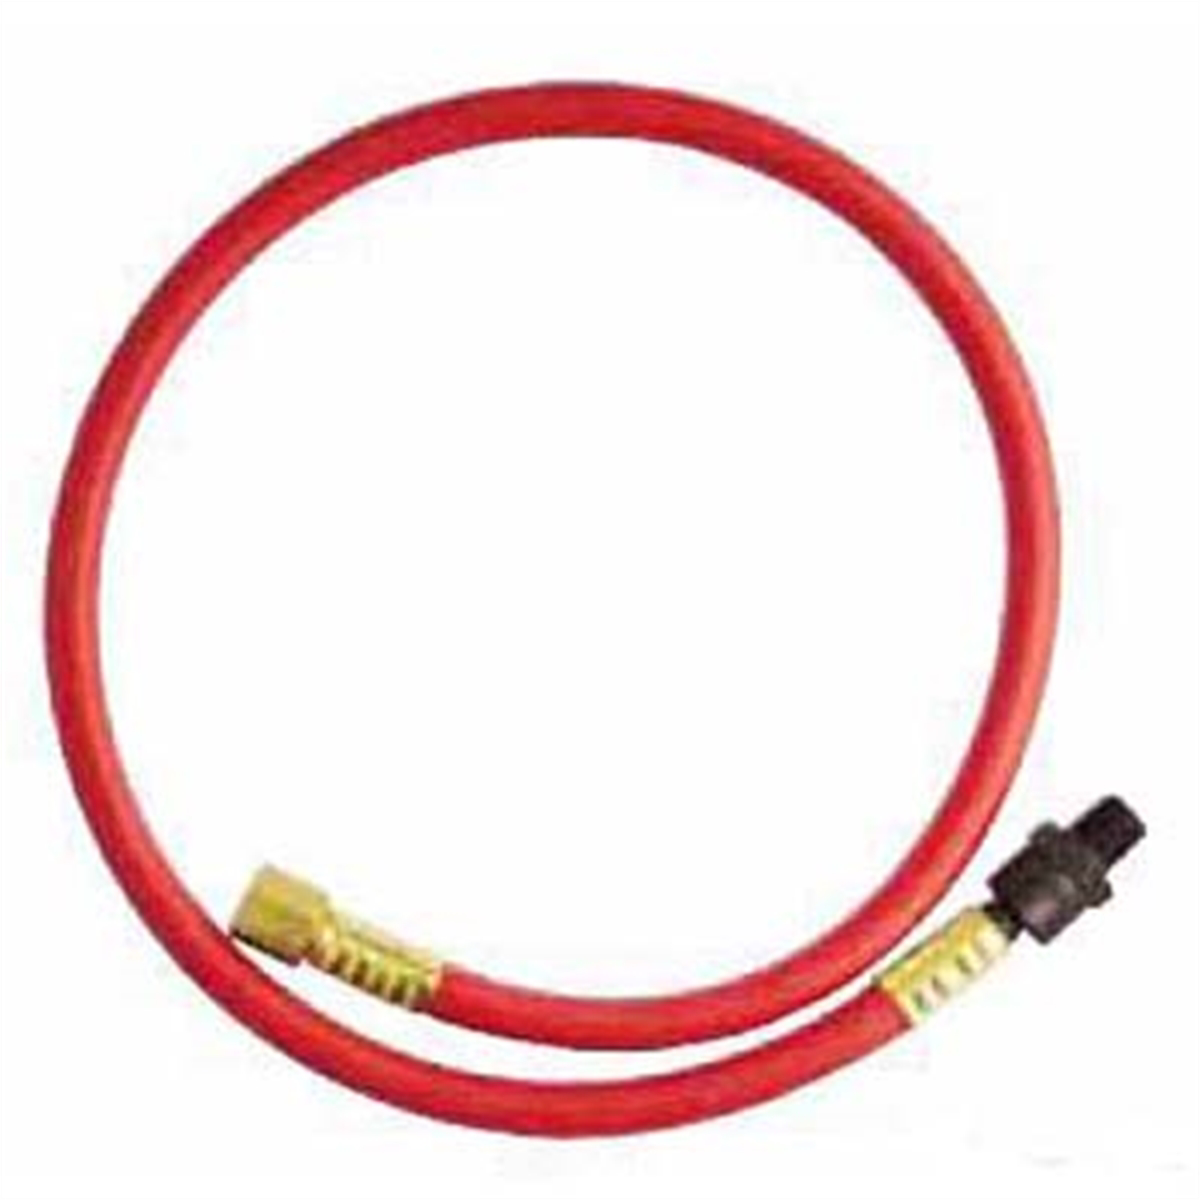 Non-Swivel End Snubber Hose - 1/2 In ID 2 Ft